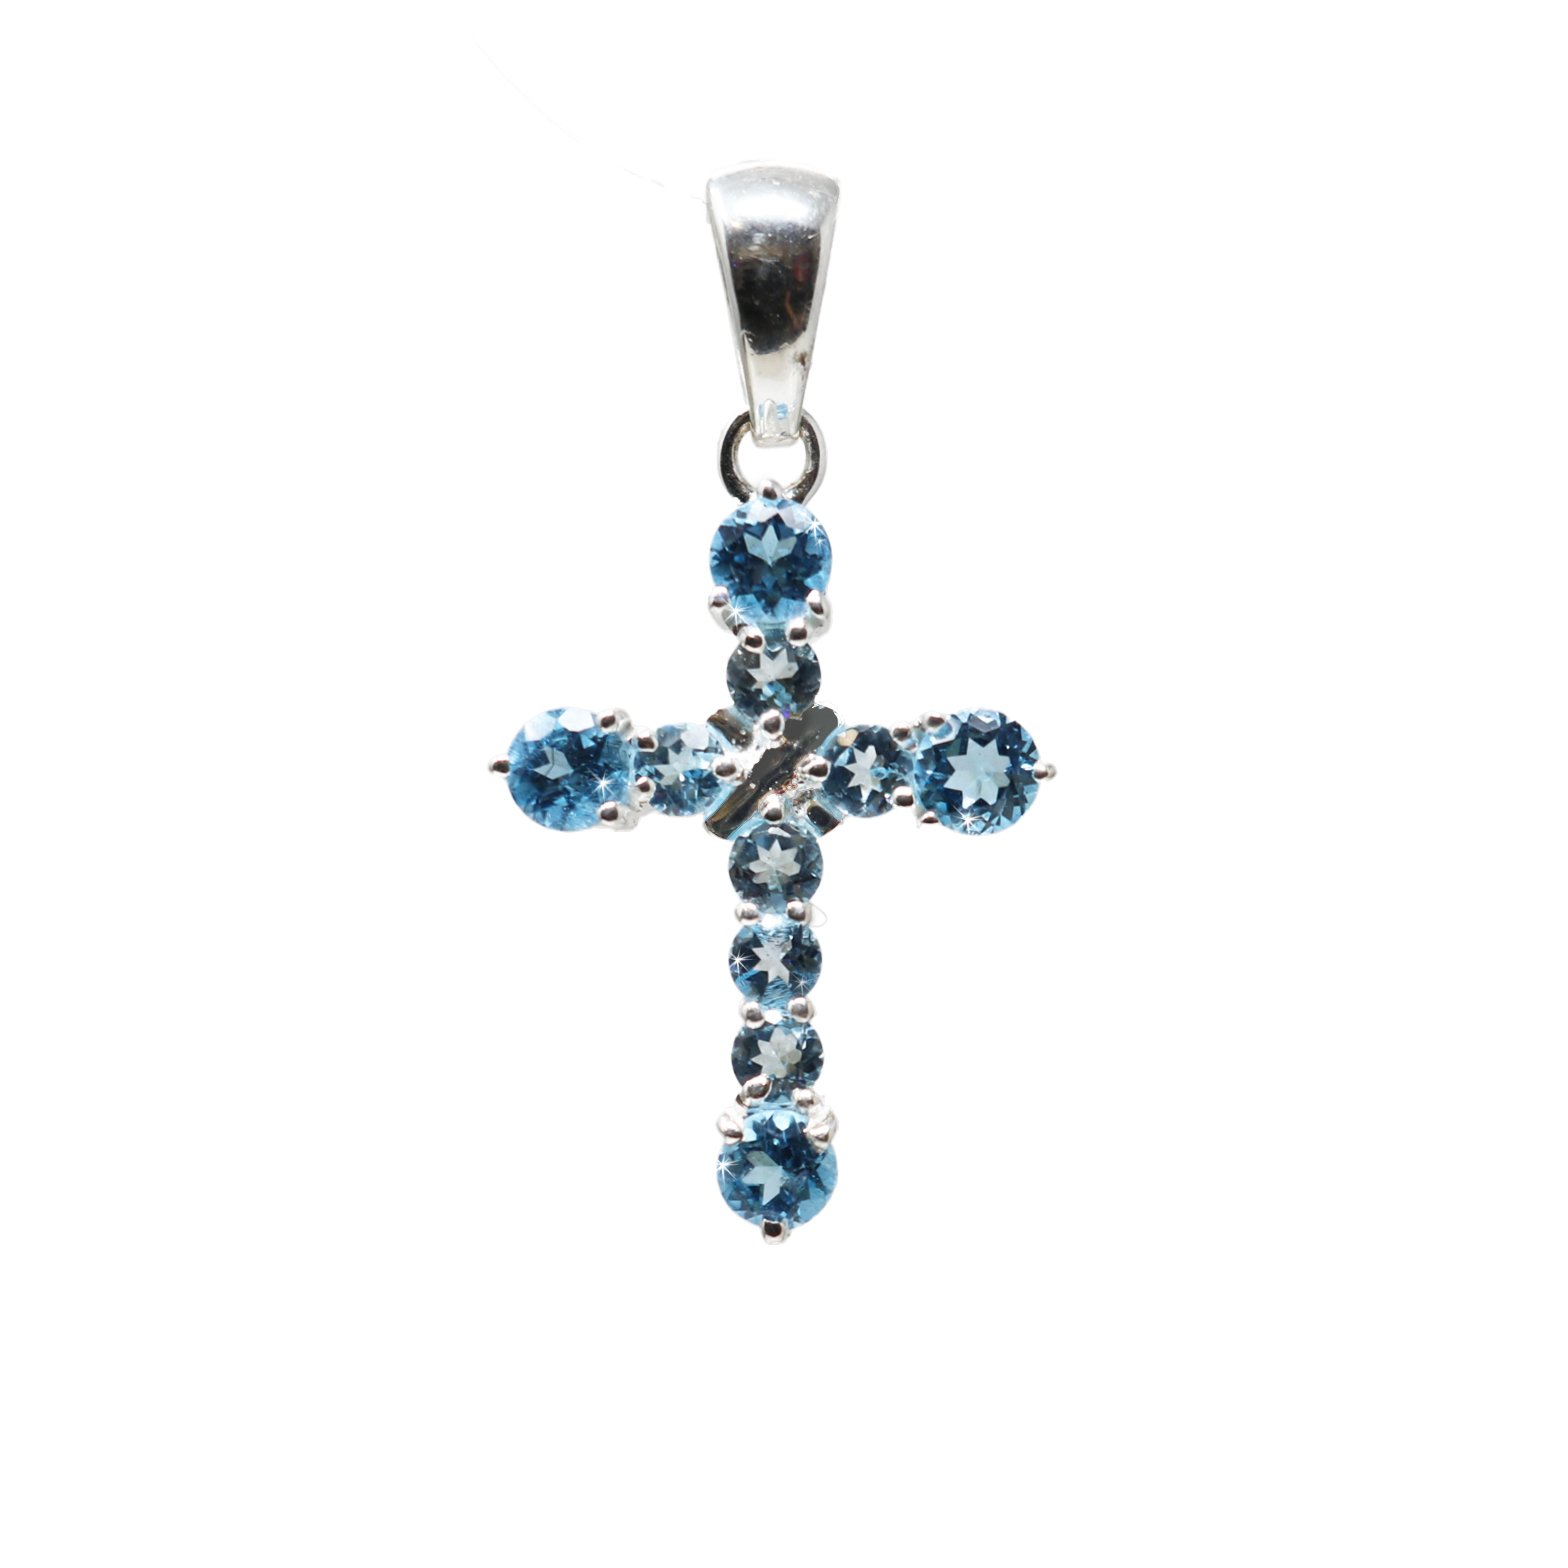 Blue Topaz Cross Pendant - 10 Rounds Prong Set - Deep Blue Faceted Rounds On Edge With Baby Blue Faceted Rounds In Center